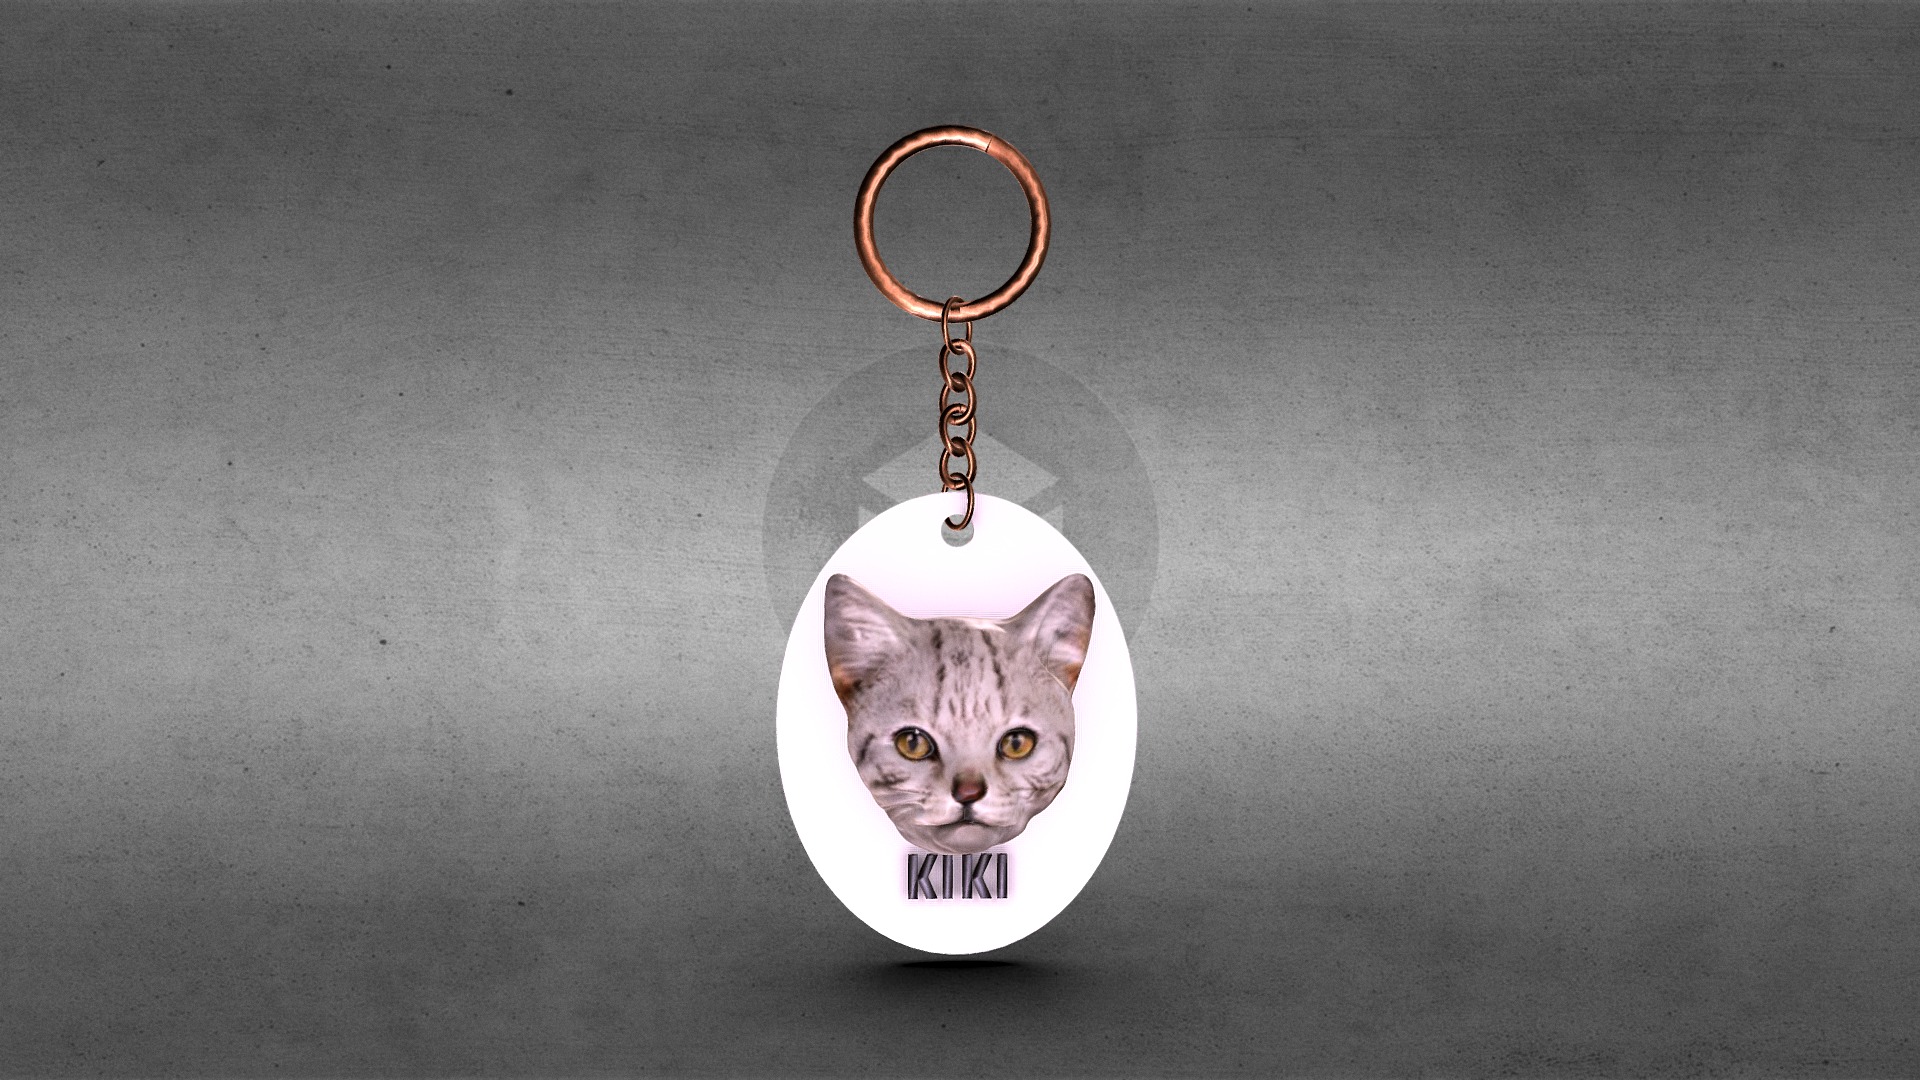 3D model Cat-Key - This is a 3D model of the Cat-Key. The 3D model is about a keychain with a cat on it.